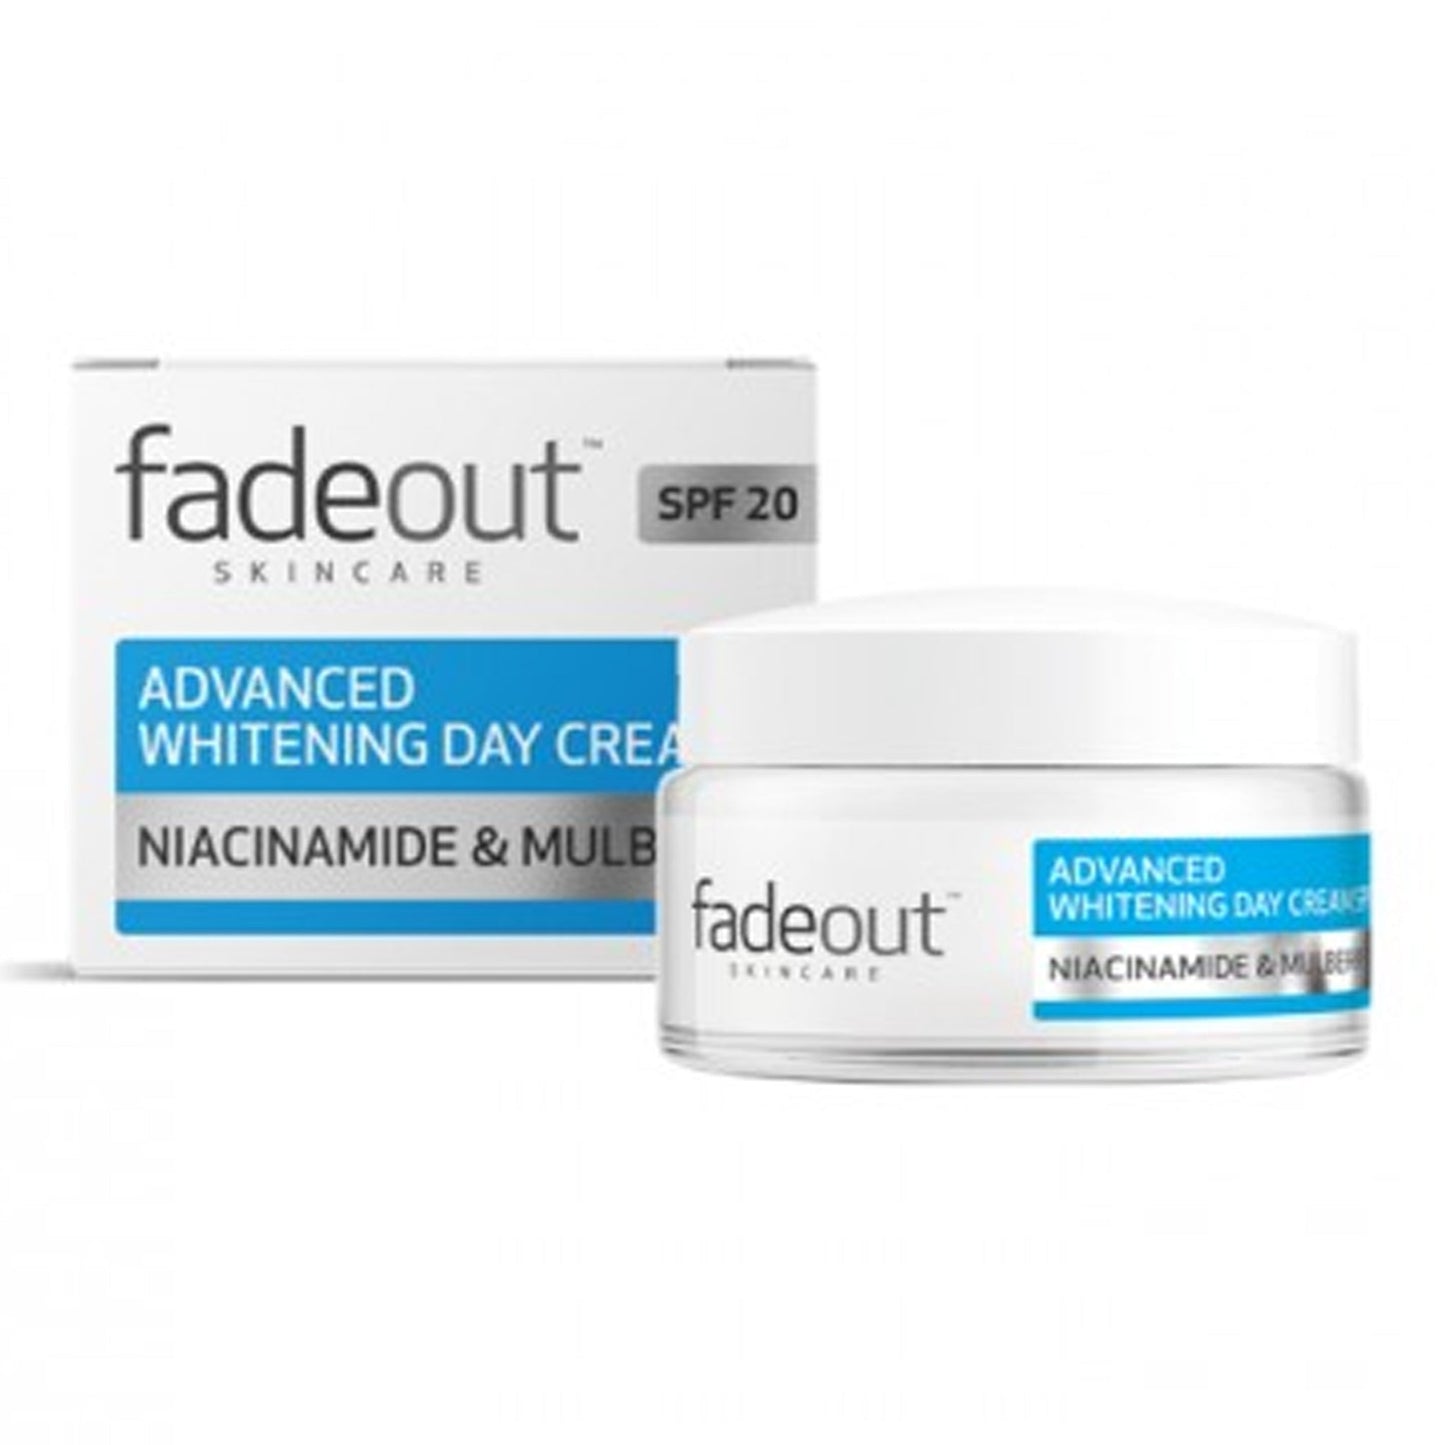 FADEOUT - ADVANCED WHITENING DAY CREAM WITH NIACINAMIDE & MULBERRY SPF 20 - 50ML